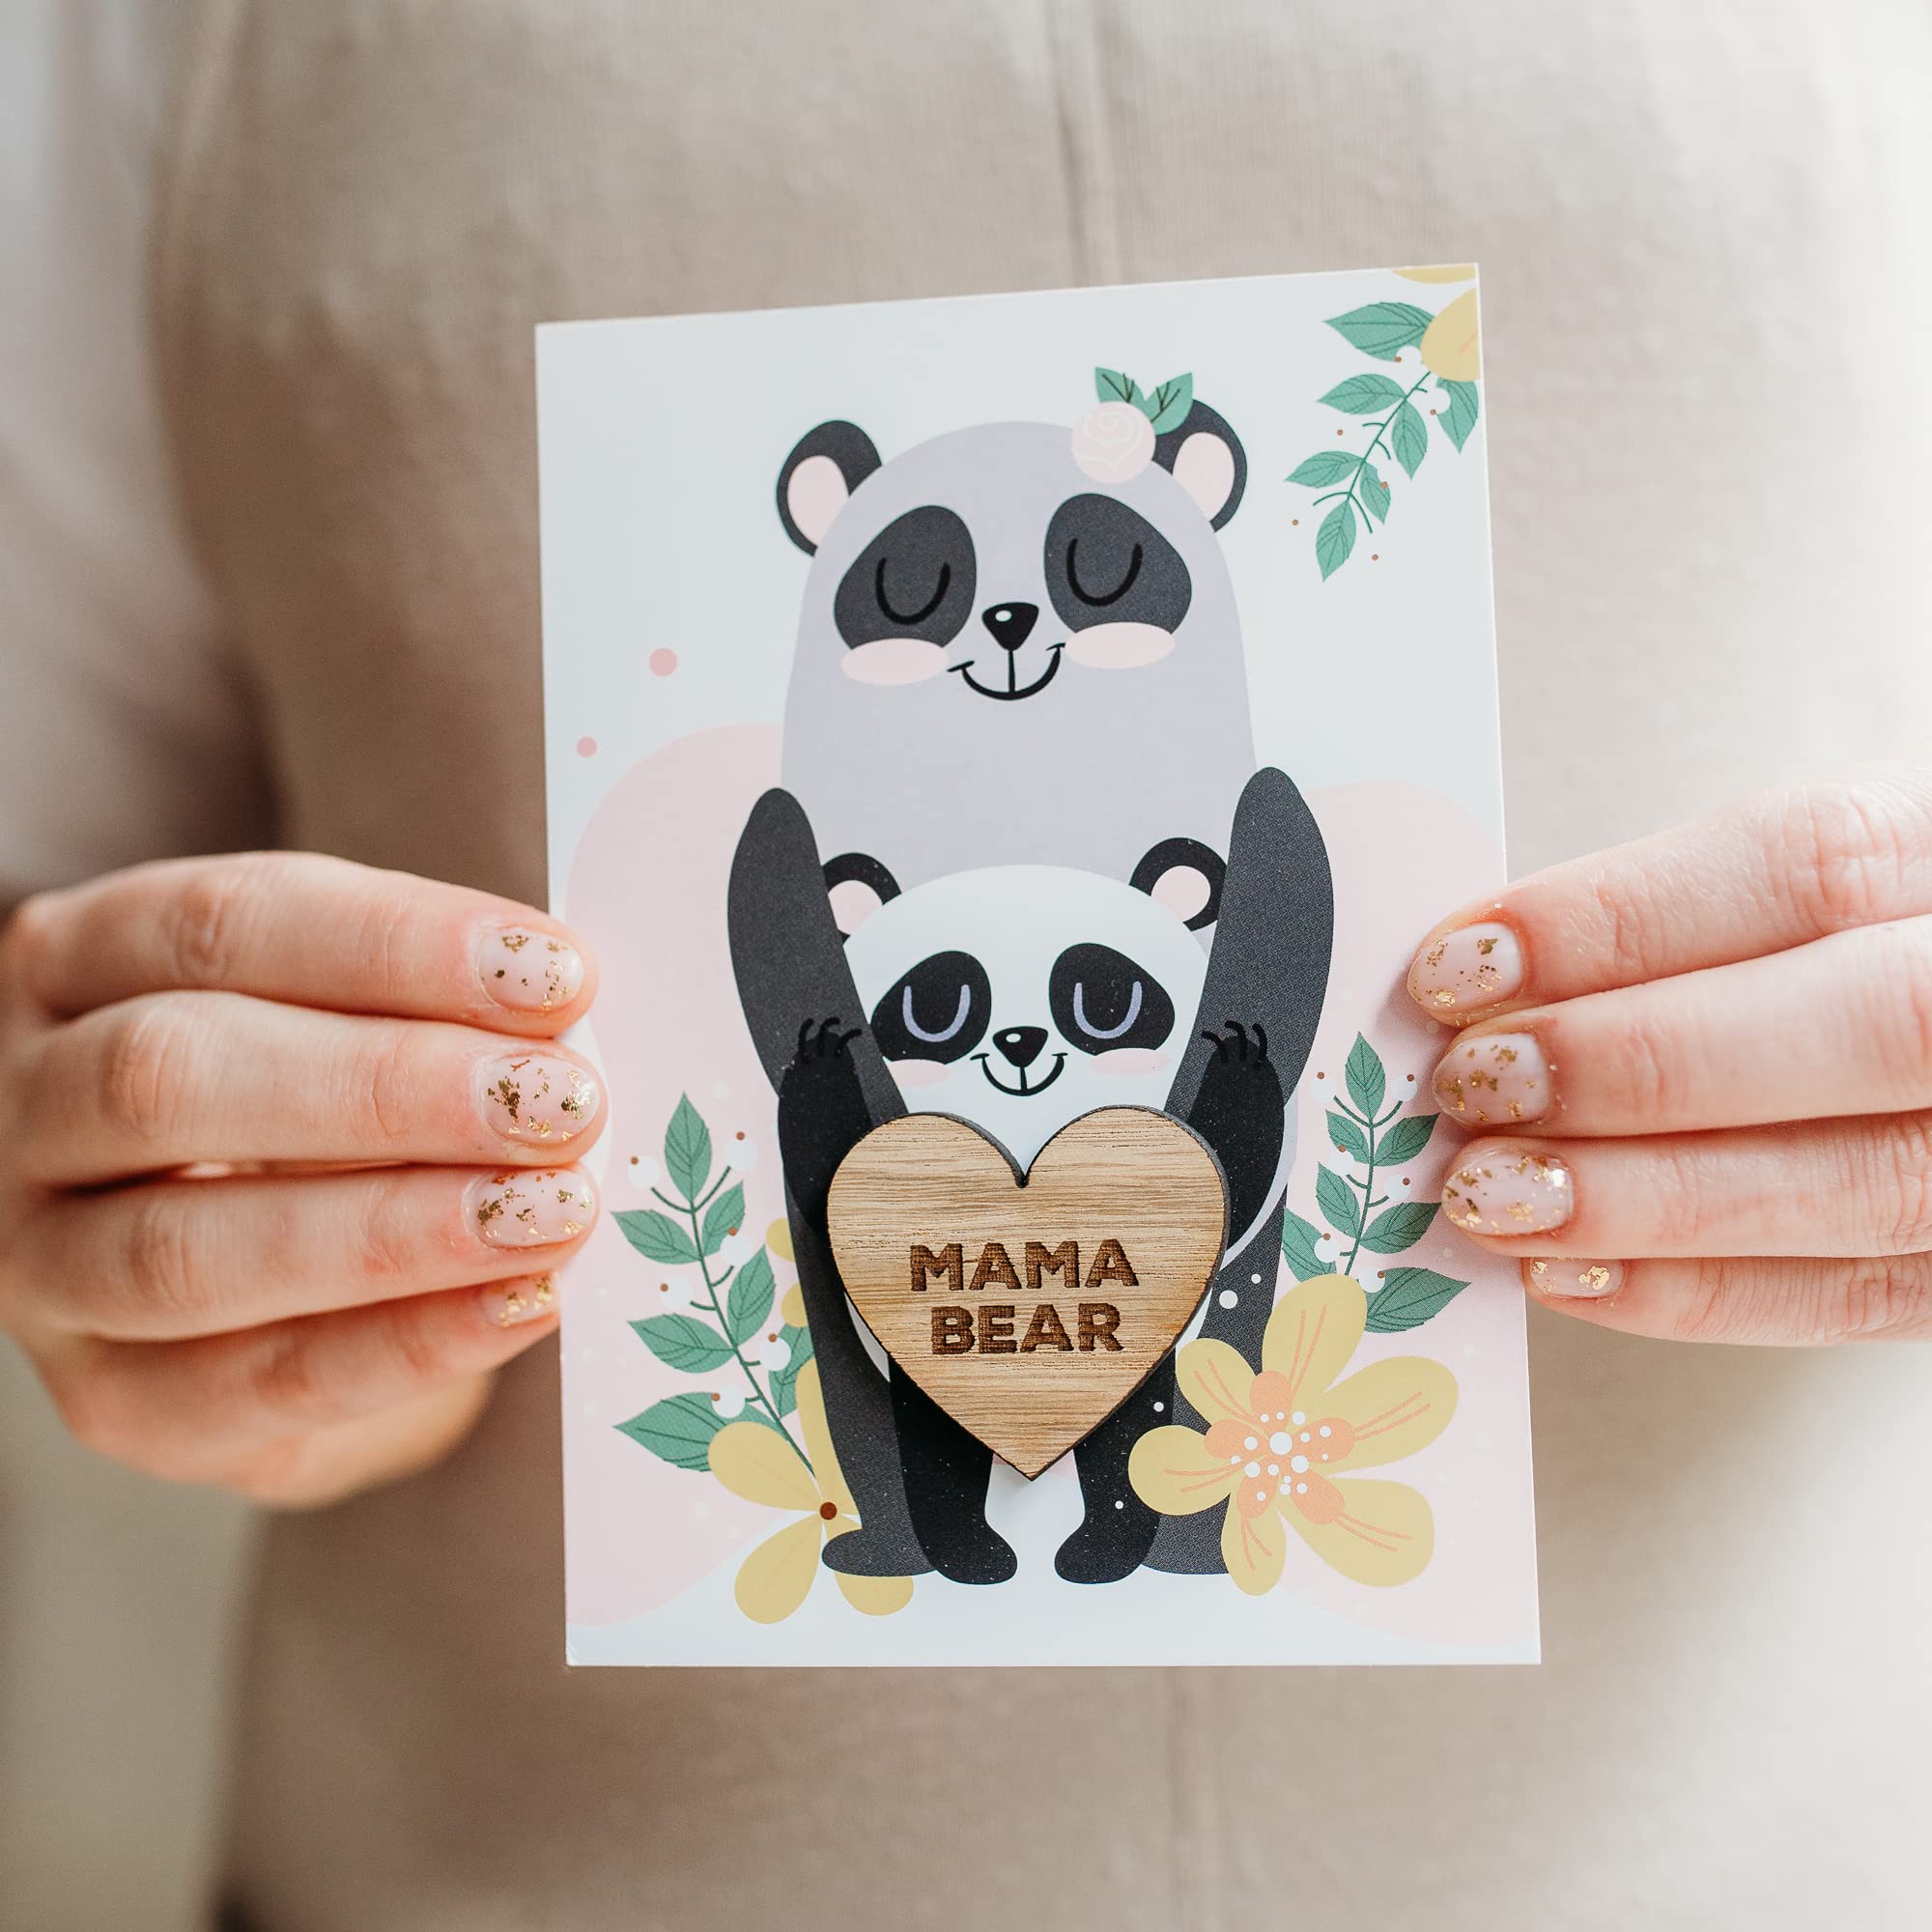 Mama Bear Mother’s Day Pocket Hug Postcard with Wooden Heart - Gift Card For Mum (Mama Bear)